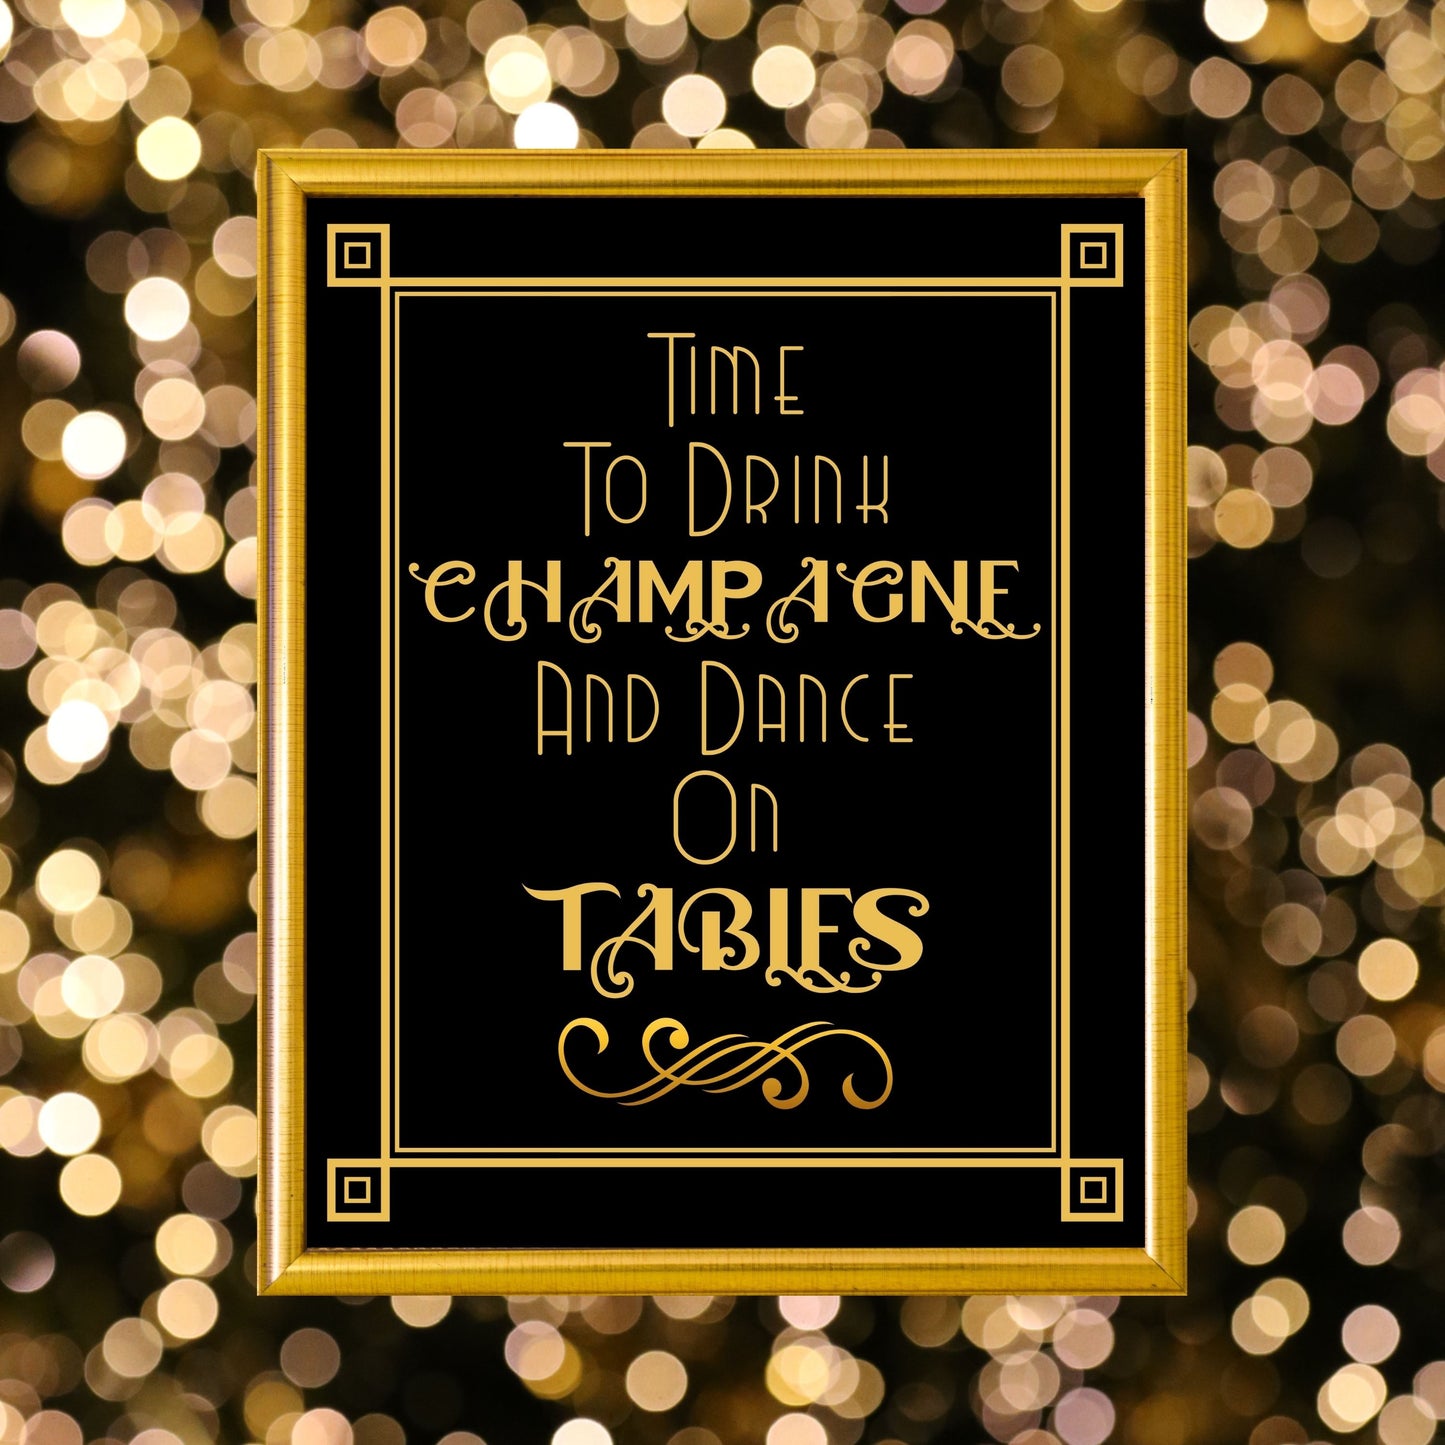 "Time To Drink Champagne And Dance On Tables" Party Sign, Great Gatsby, Roaring 20's, Printable Party Decor